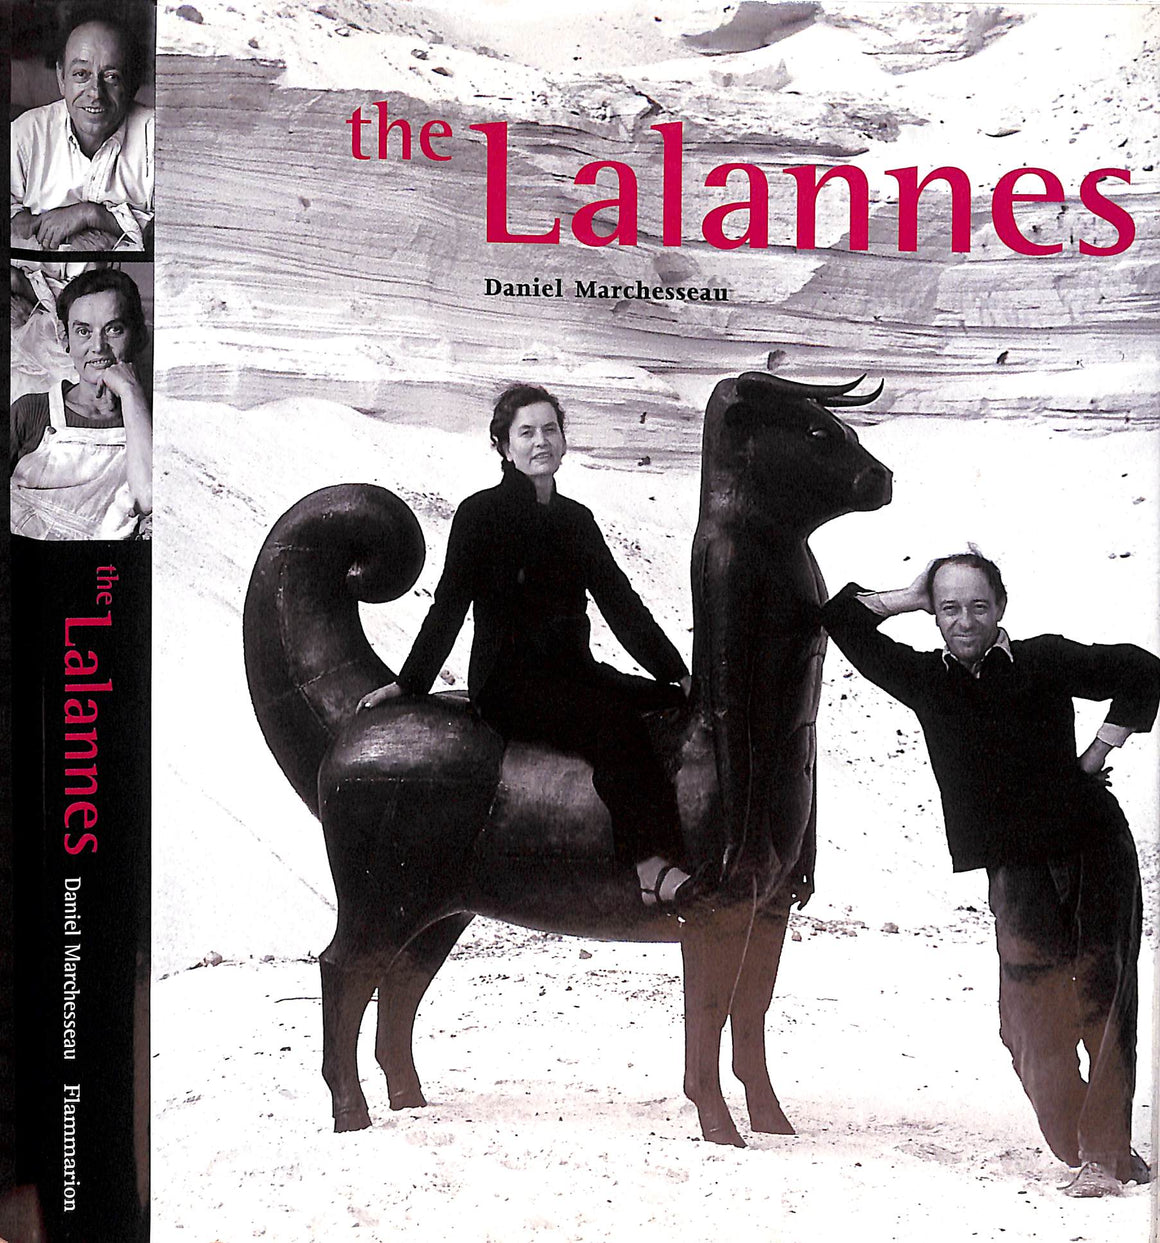 "The Lalannes" 2004 MARCHESSEAU, Daniel (INSCRIBED by CL)